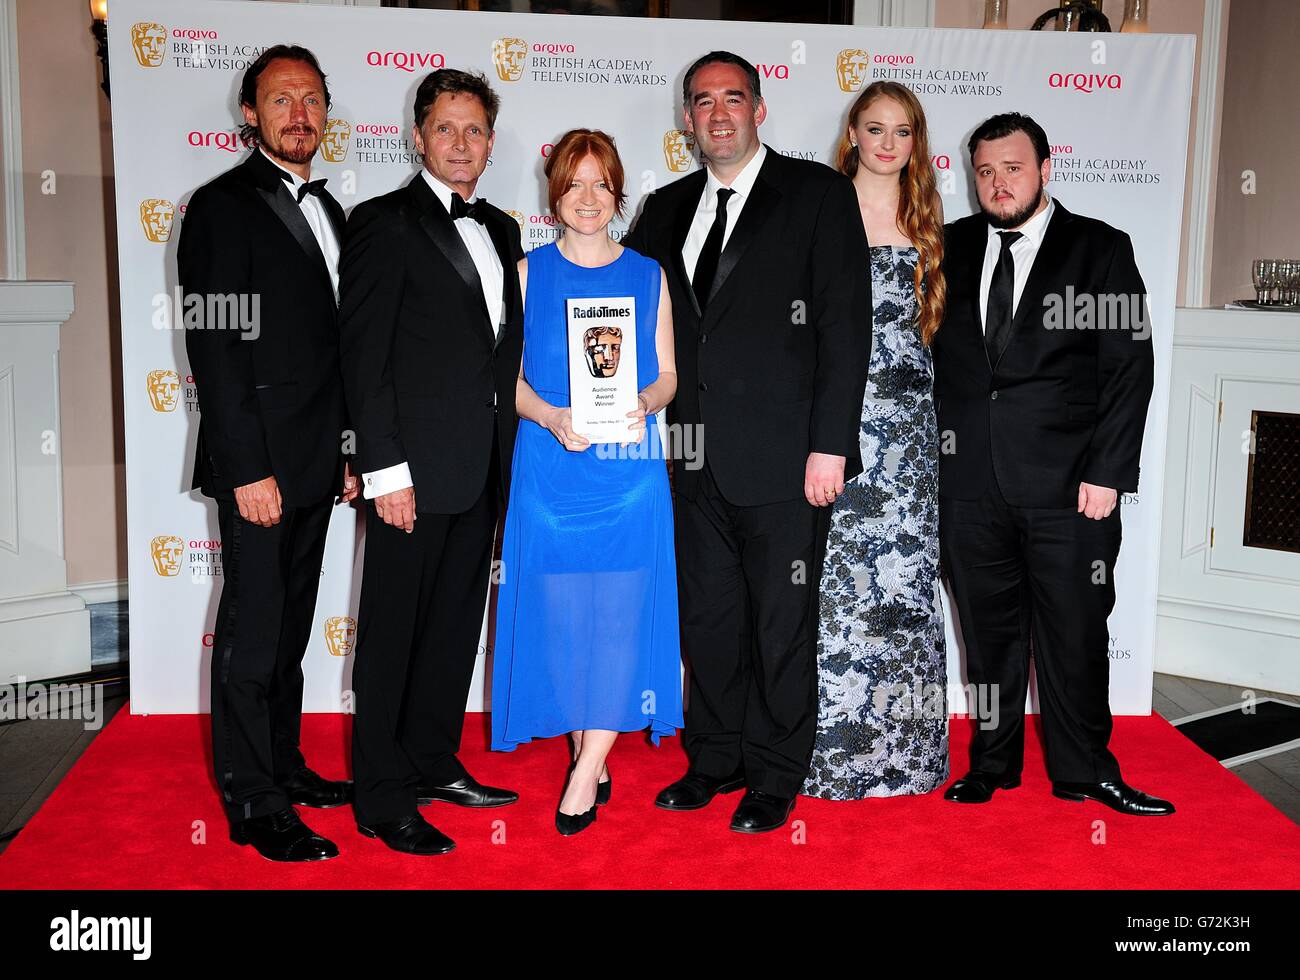 Presenters Jerome Flynn (far left), Sophie Turner (second rigth) and John Bradley (far right) with winners of the Audience Award for Doctor Who, at the Arqiva British Academy Television Awards 2014 at the Theatre Royal, Drury Lane, London. Stock Photo